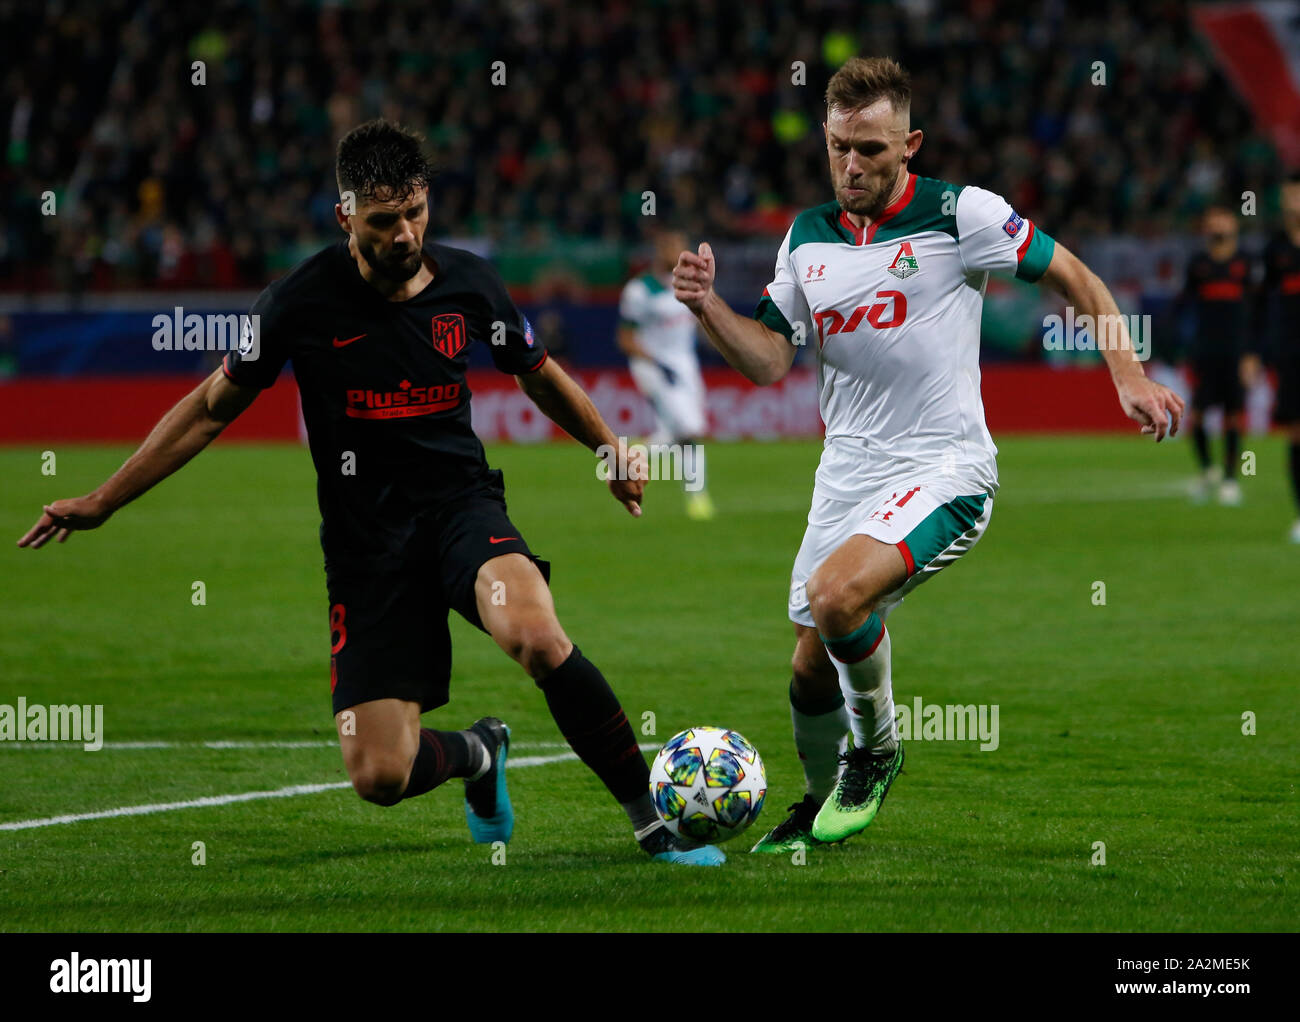 MOSCOW, RUSSIA - OCTOBER 01: Maciej Rybus (R) of Lokomotiv Moskva and Felipe of Atletico Madrid vie for the ball during the UEFA Champions League group D match between Lokomotiv Moskva and Atletico Madrid at RZD Arena on October 1, 2019 in Moscow, Russia. (Photo by MB Media) Stock Photo